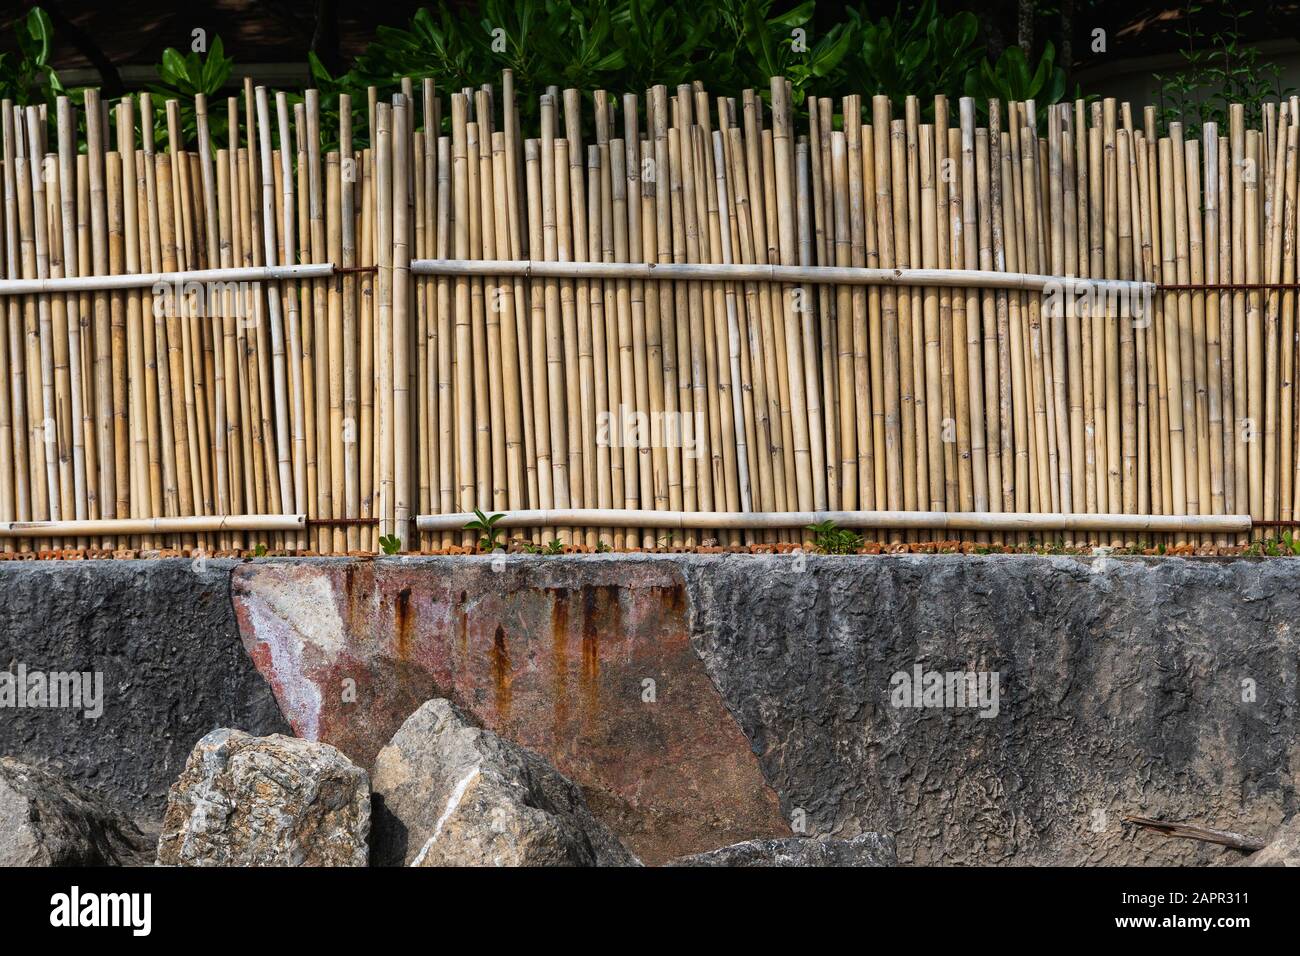 Dry bamboo fence with a rocks. Eco natural background concept. Stock Photo